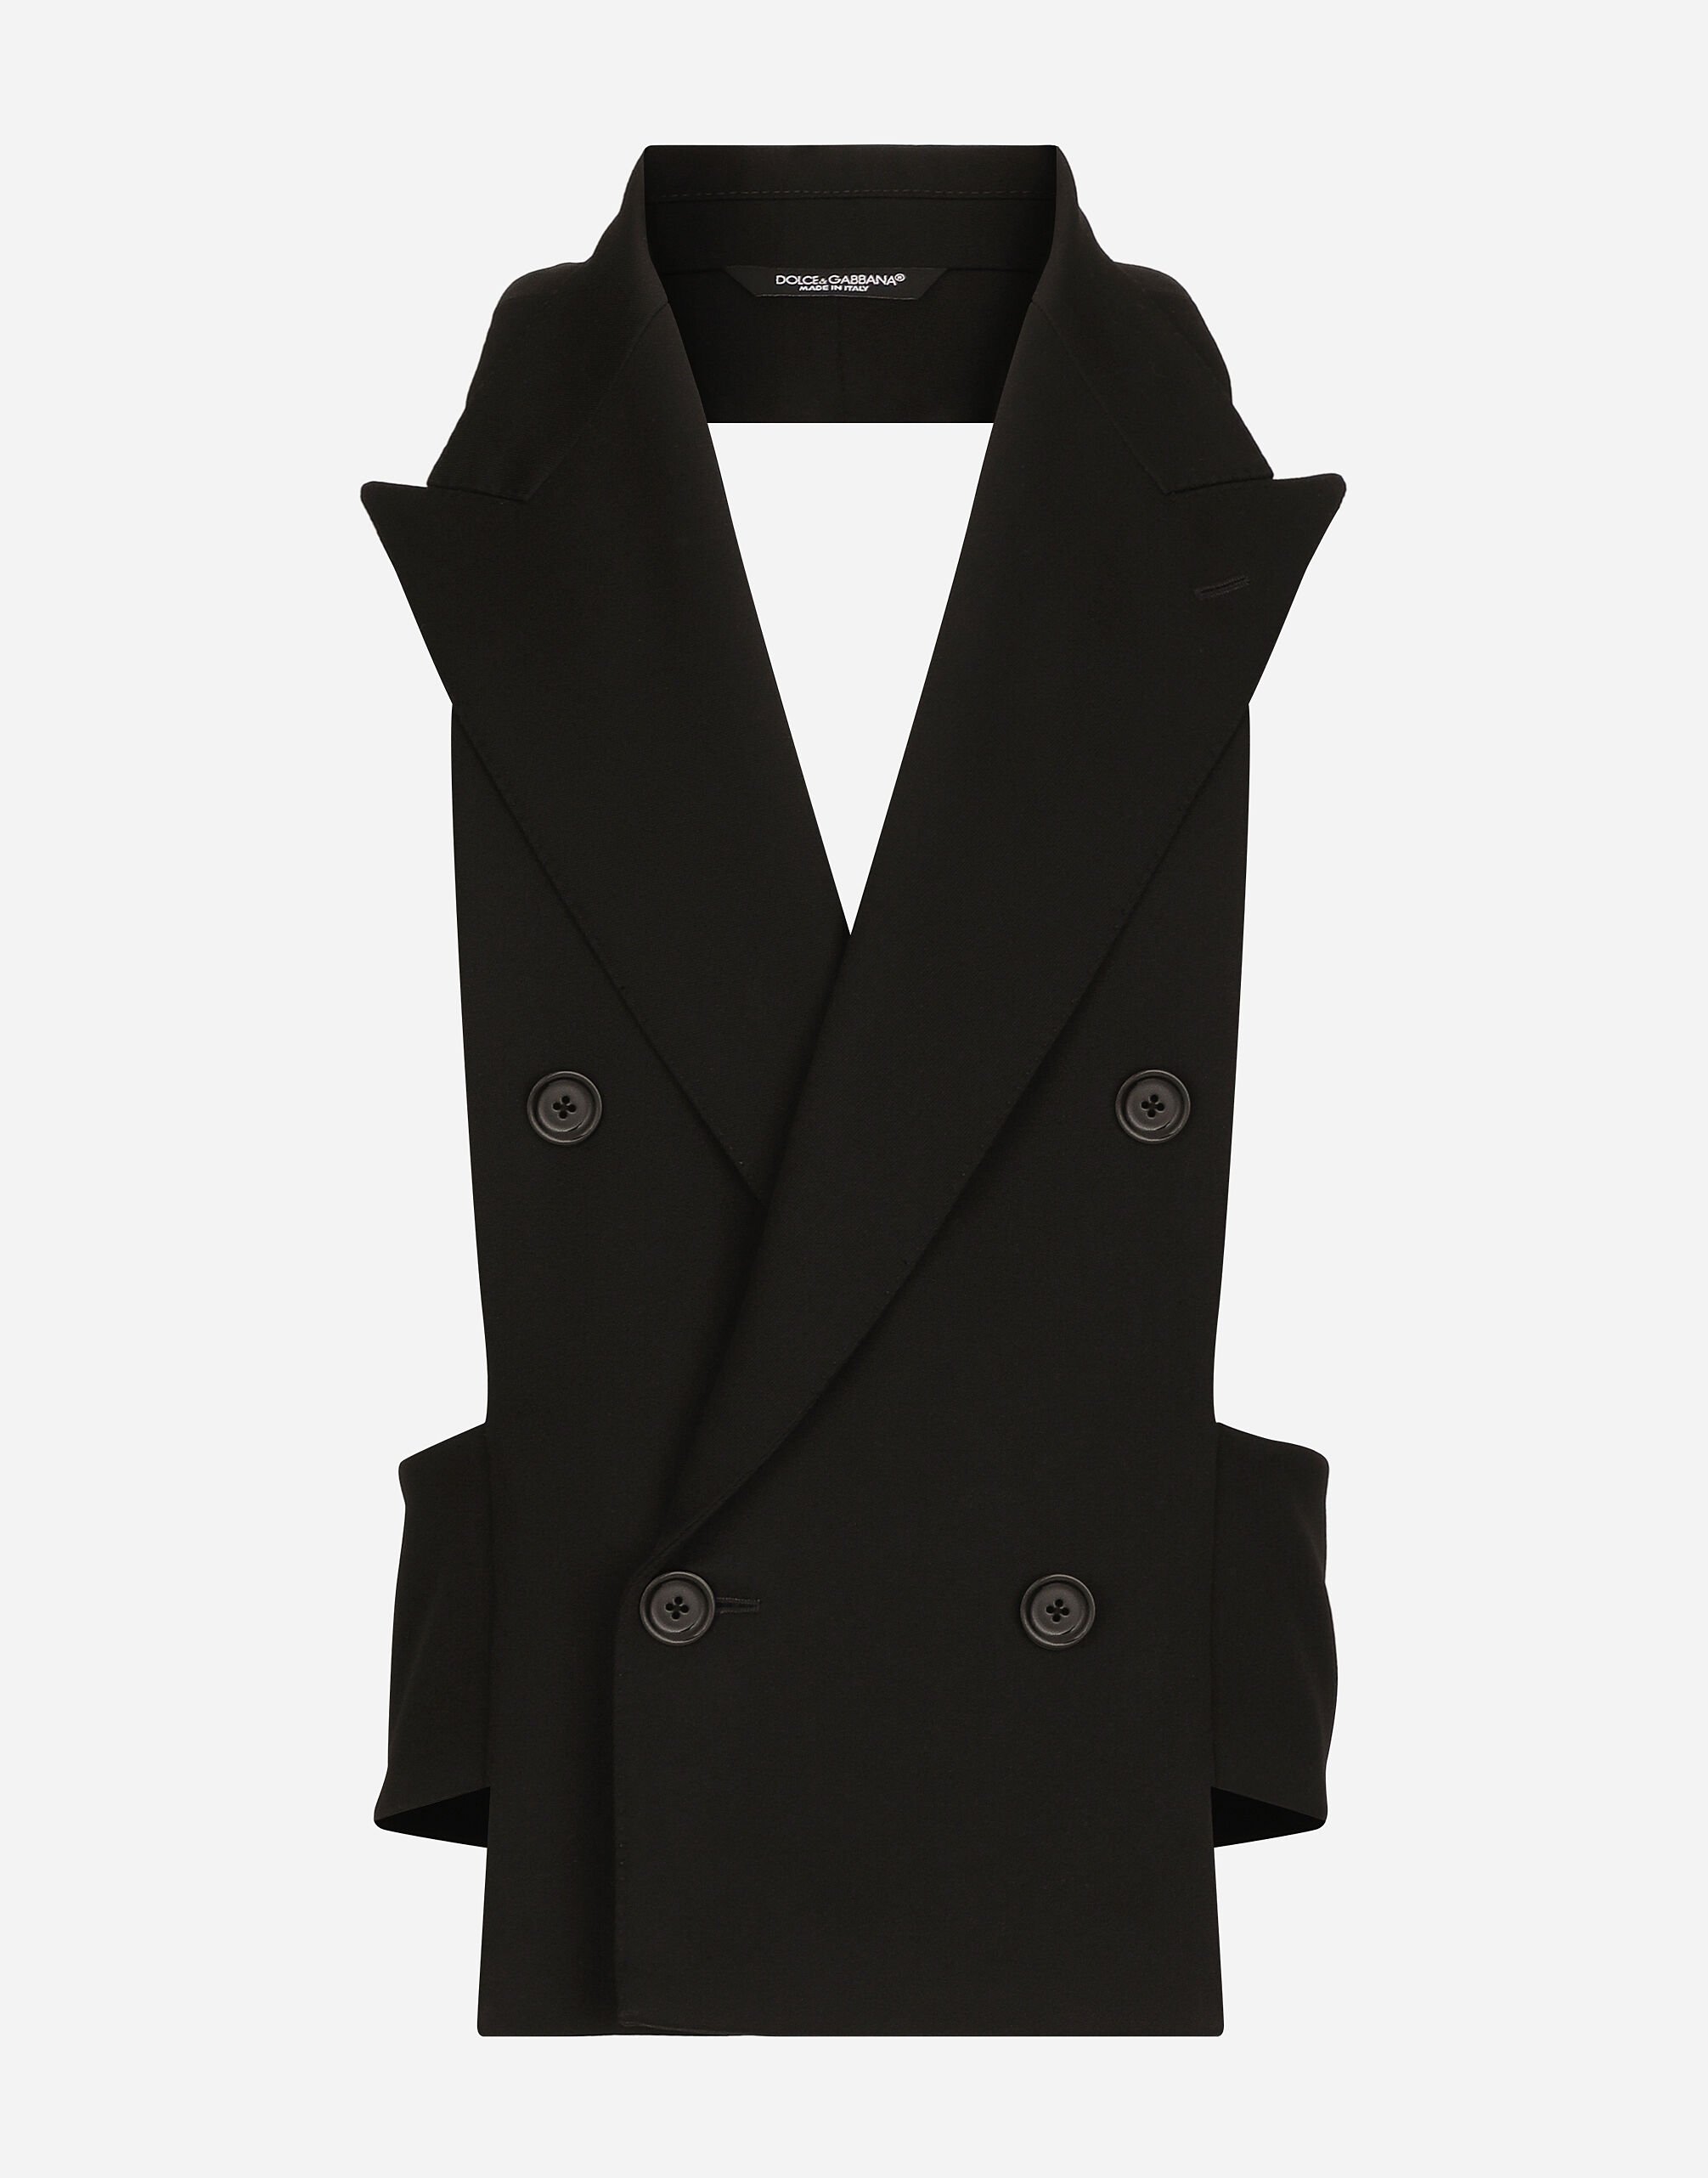 Dolce & Gabbana Double-breasted wool waistcoat with bare back Black VG446FVP187